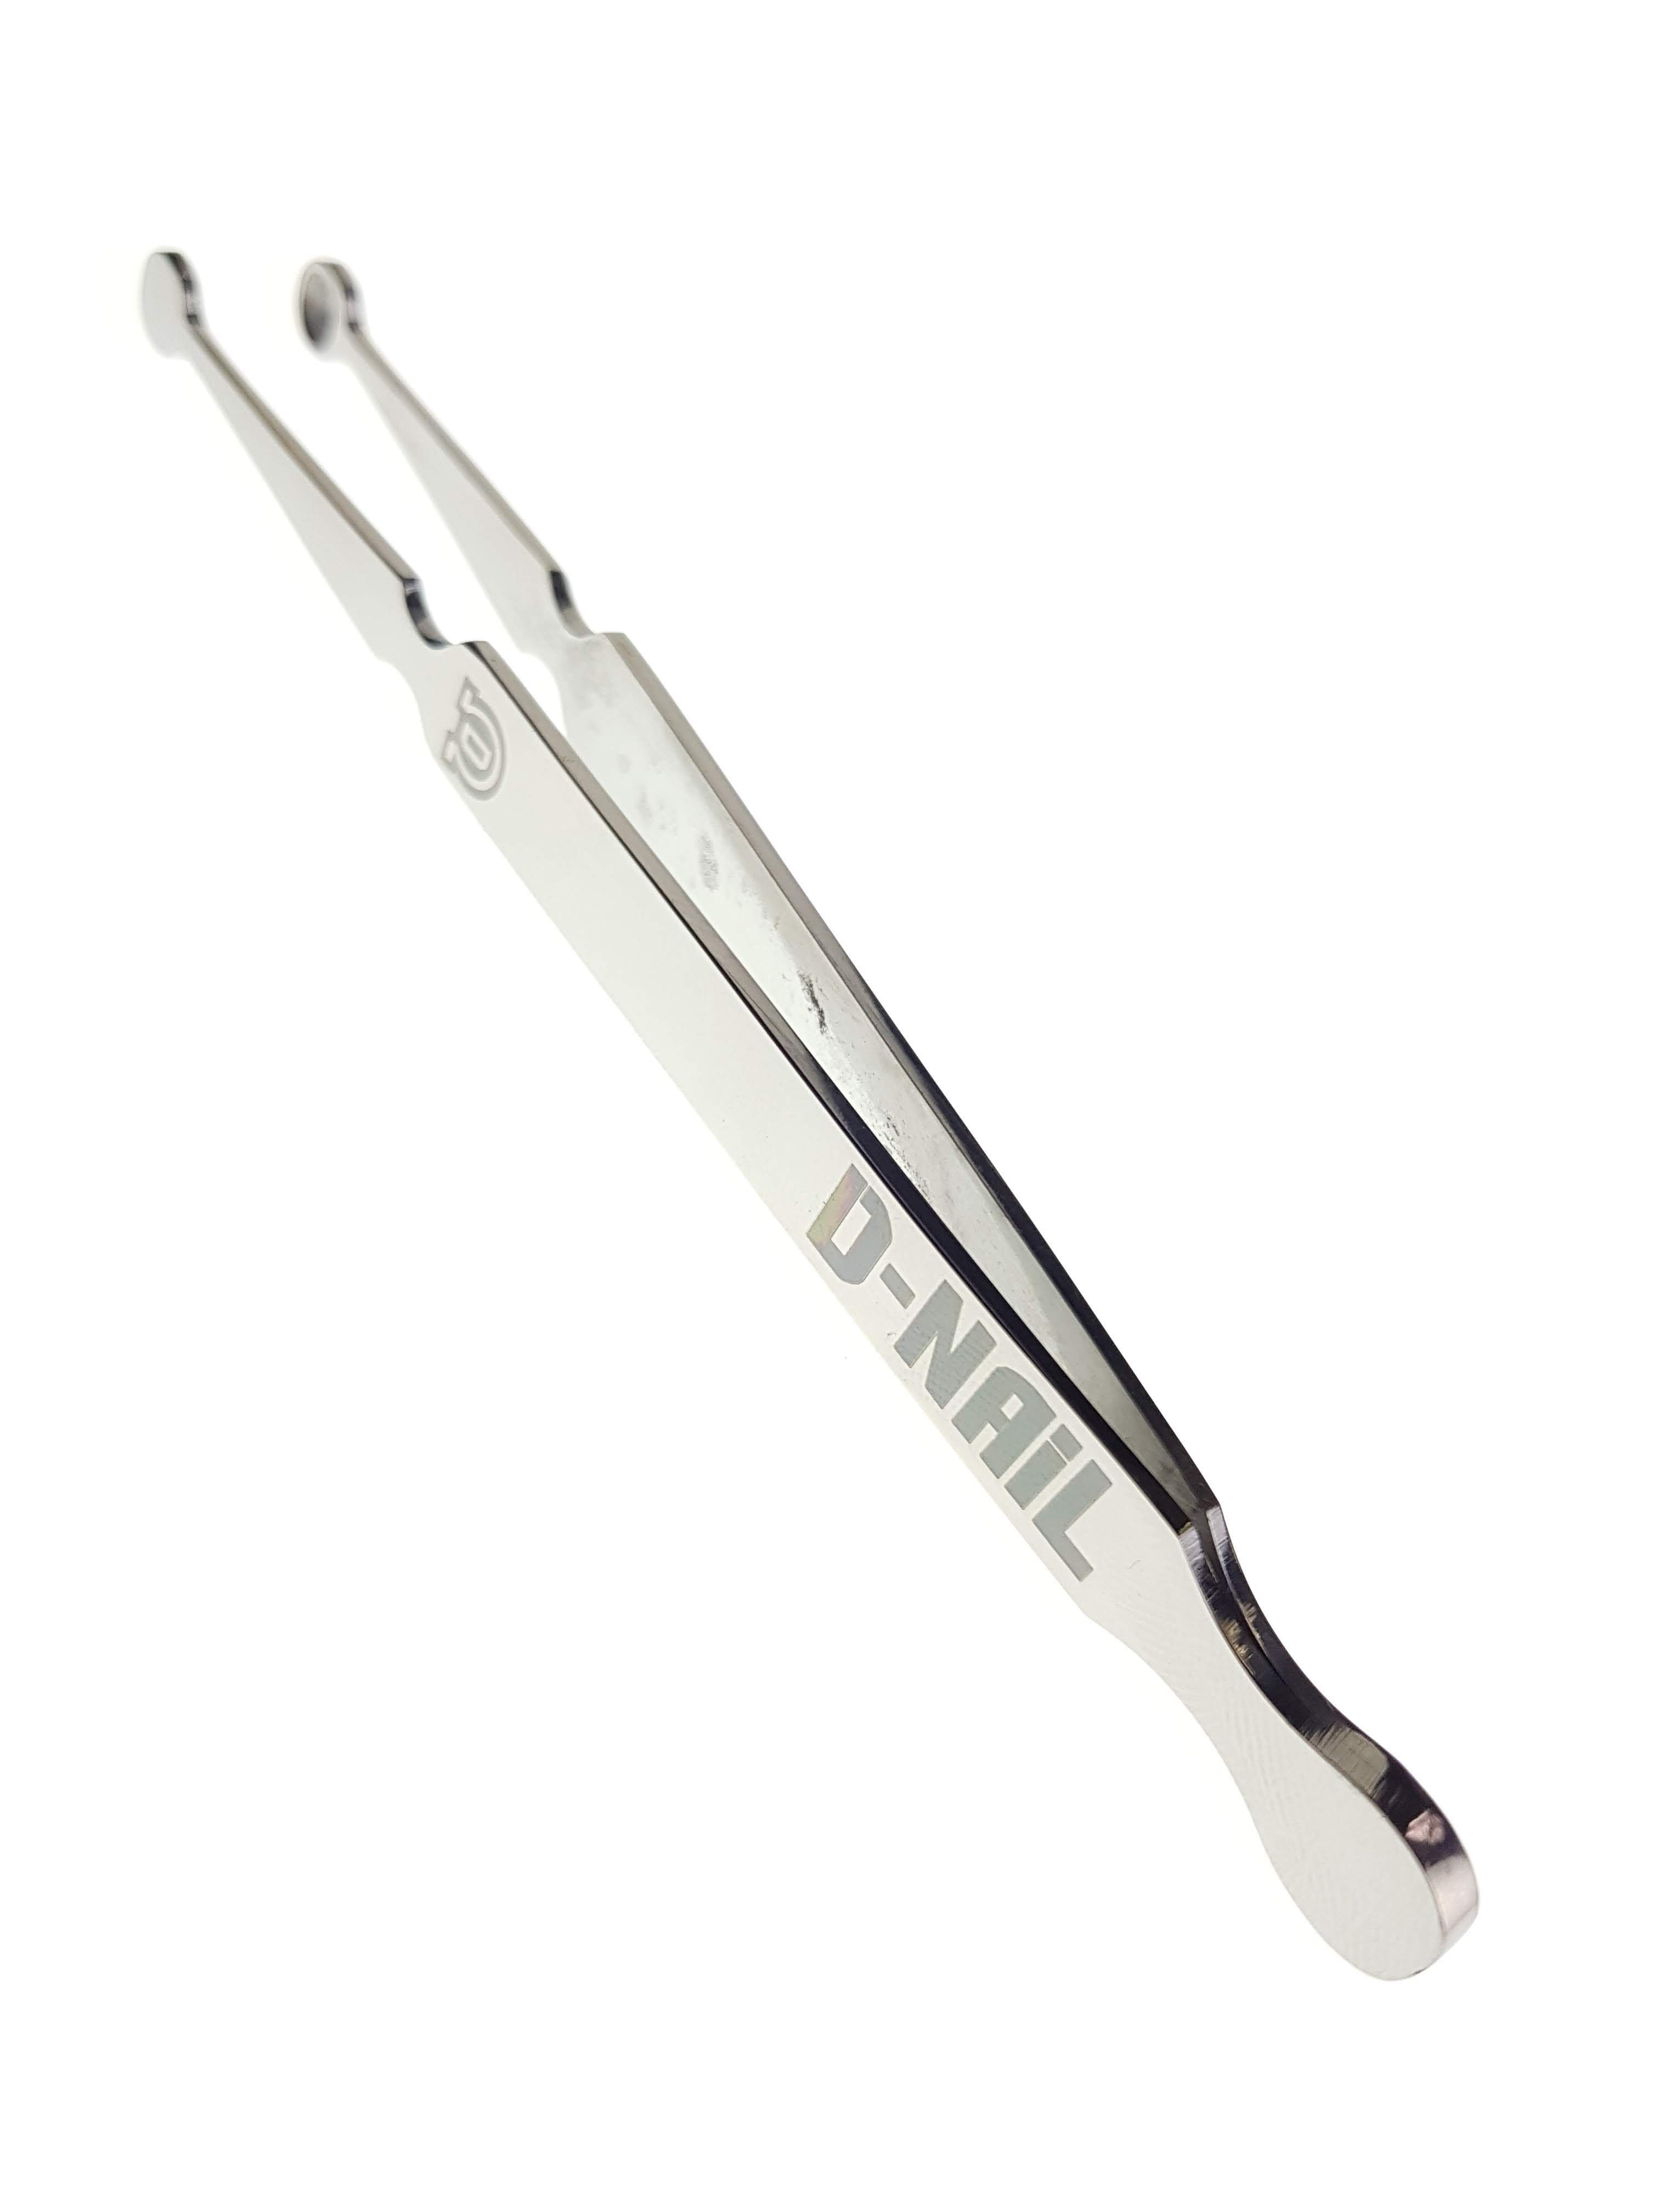 D-Nail - Round Tip Tweezers for Banger Beads - The Dab Lab